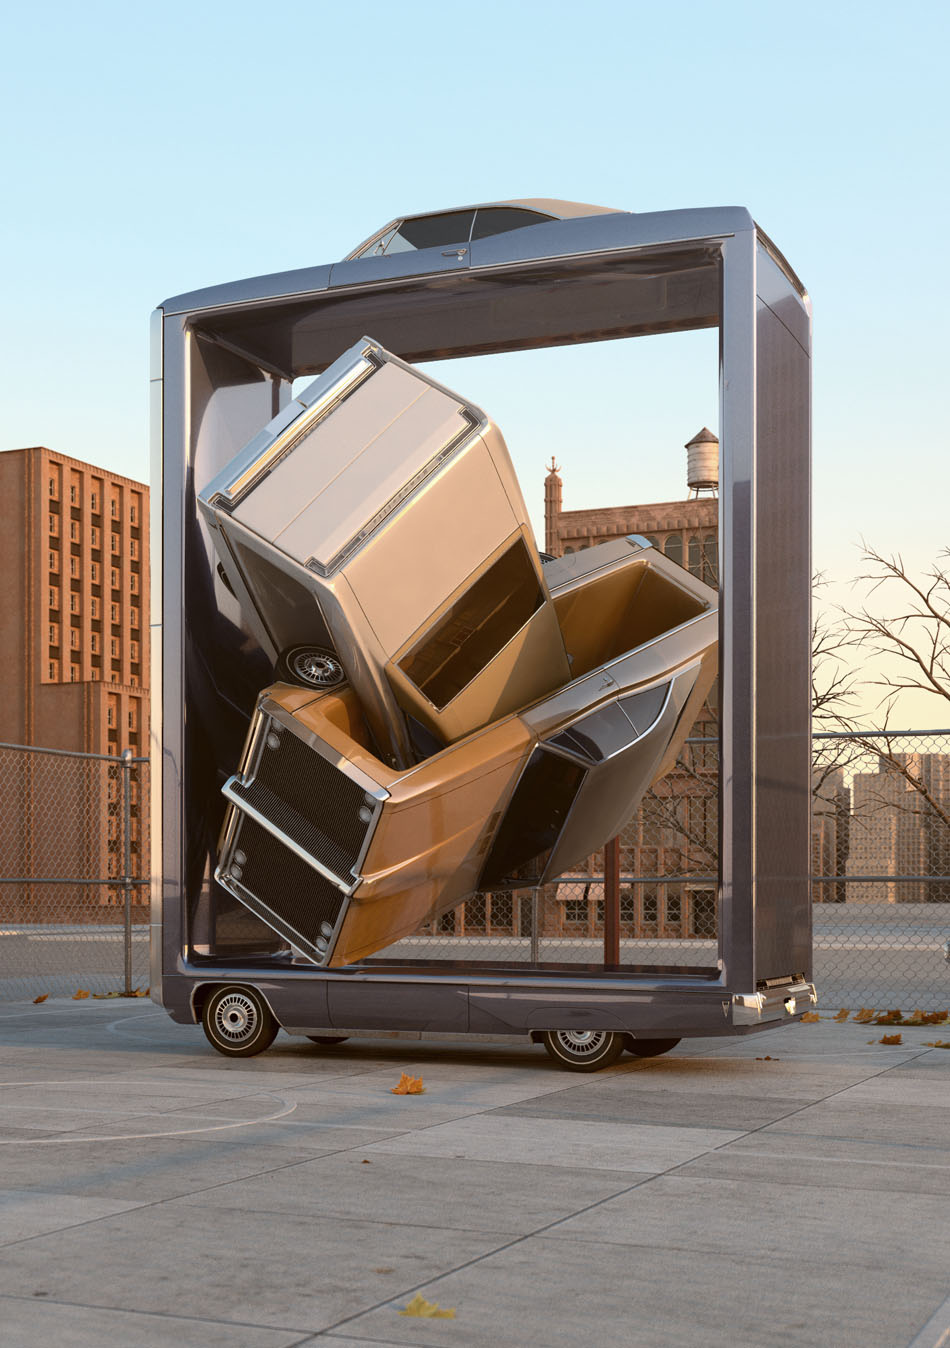 Auto Aerobics: Hyperrealistic Images Of Outrageously Weird Cars